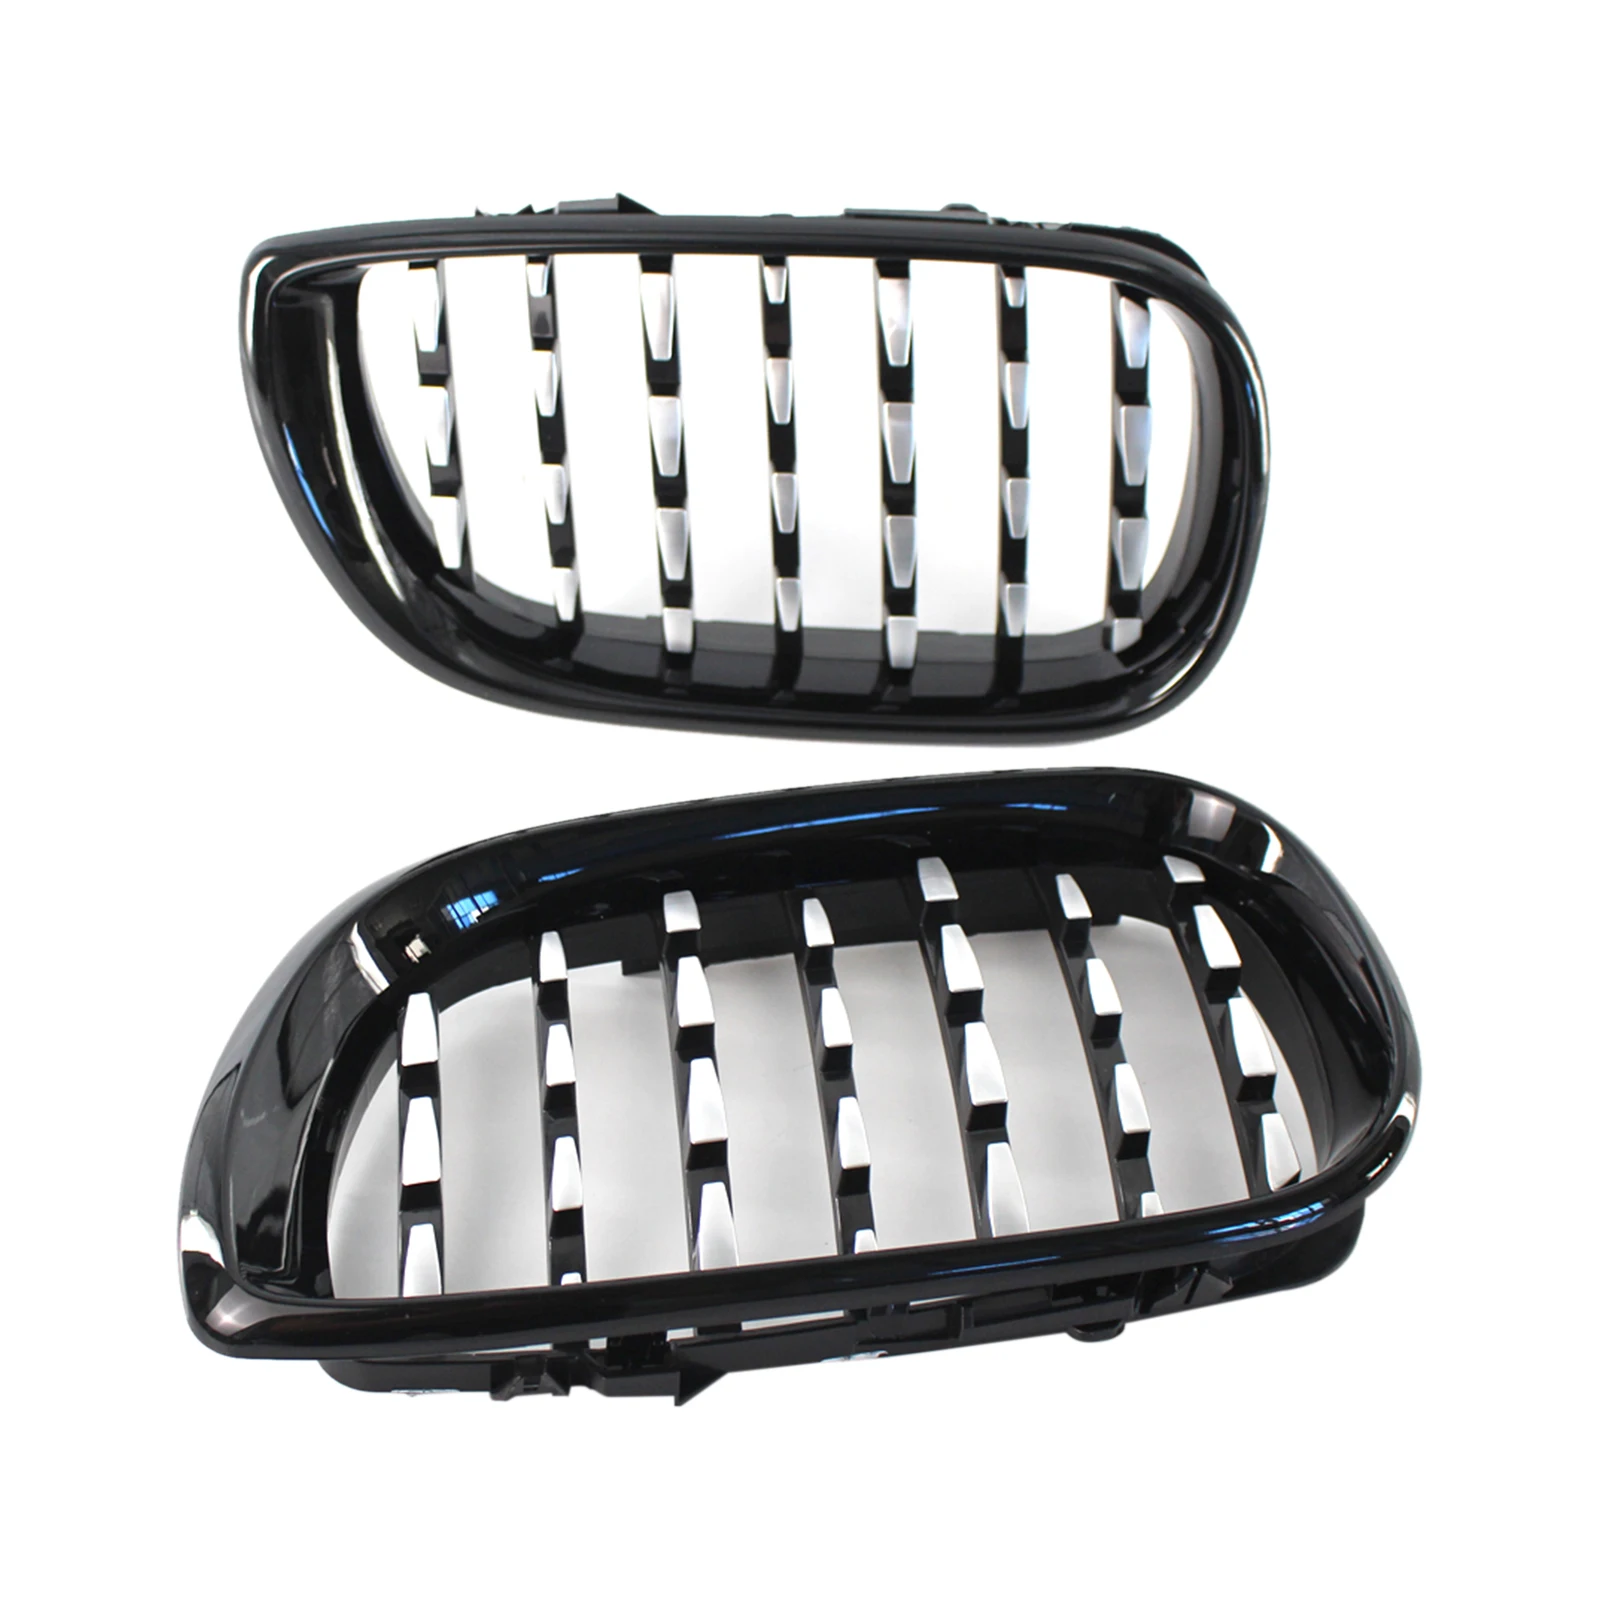 1 Pair Auto Front Kidney Grille Fit for BMW 3 Series E46 4-door 2002-2005